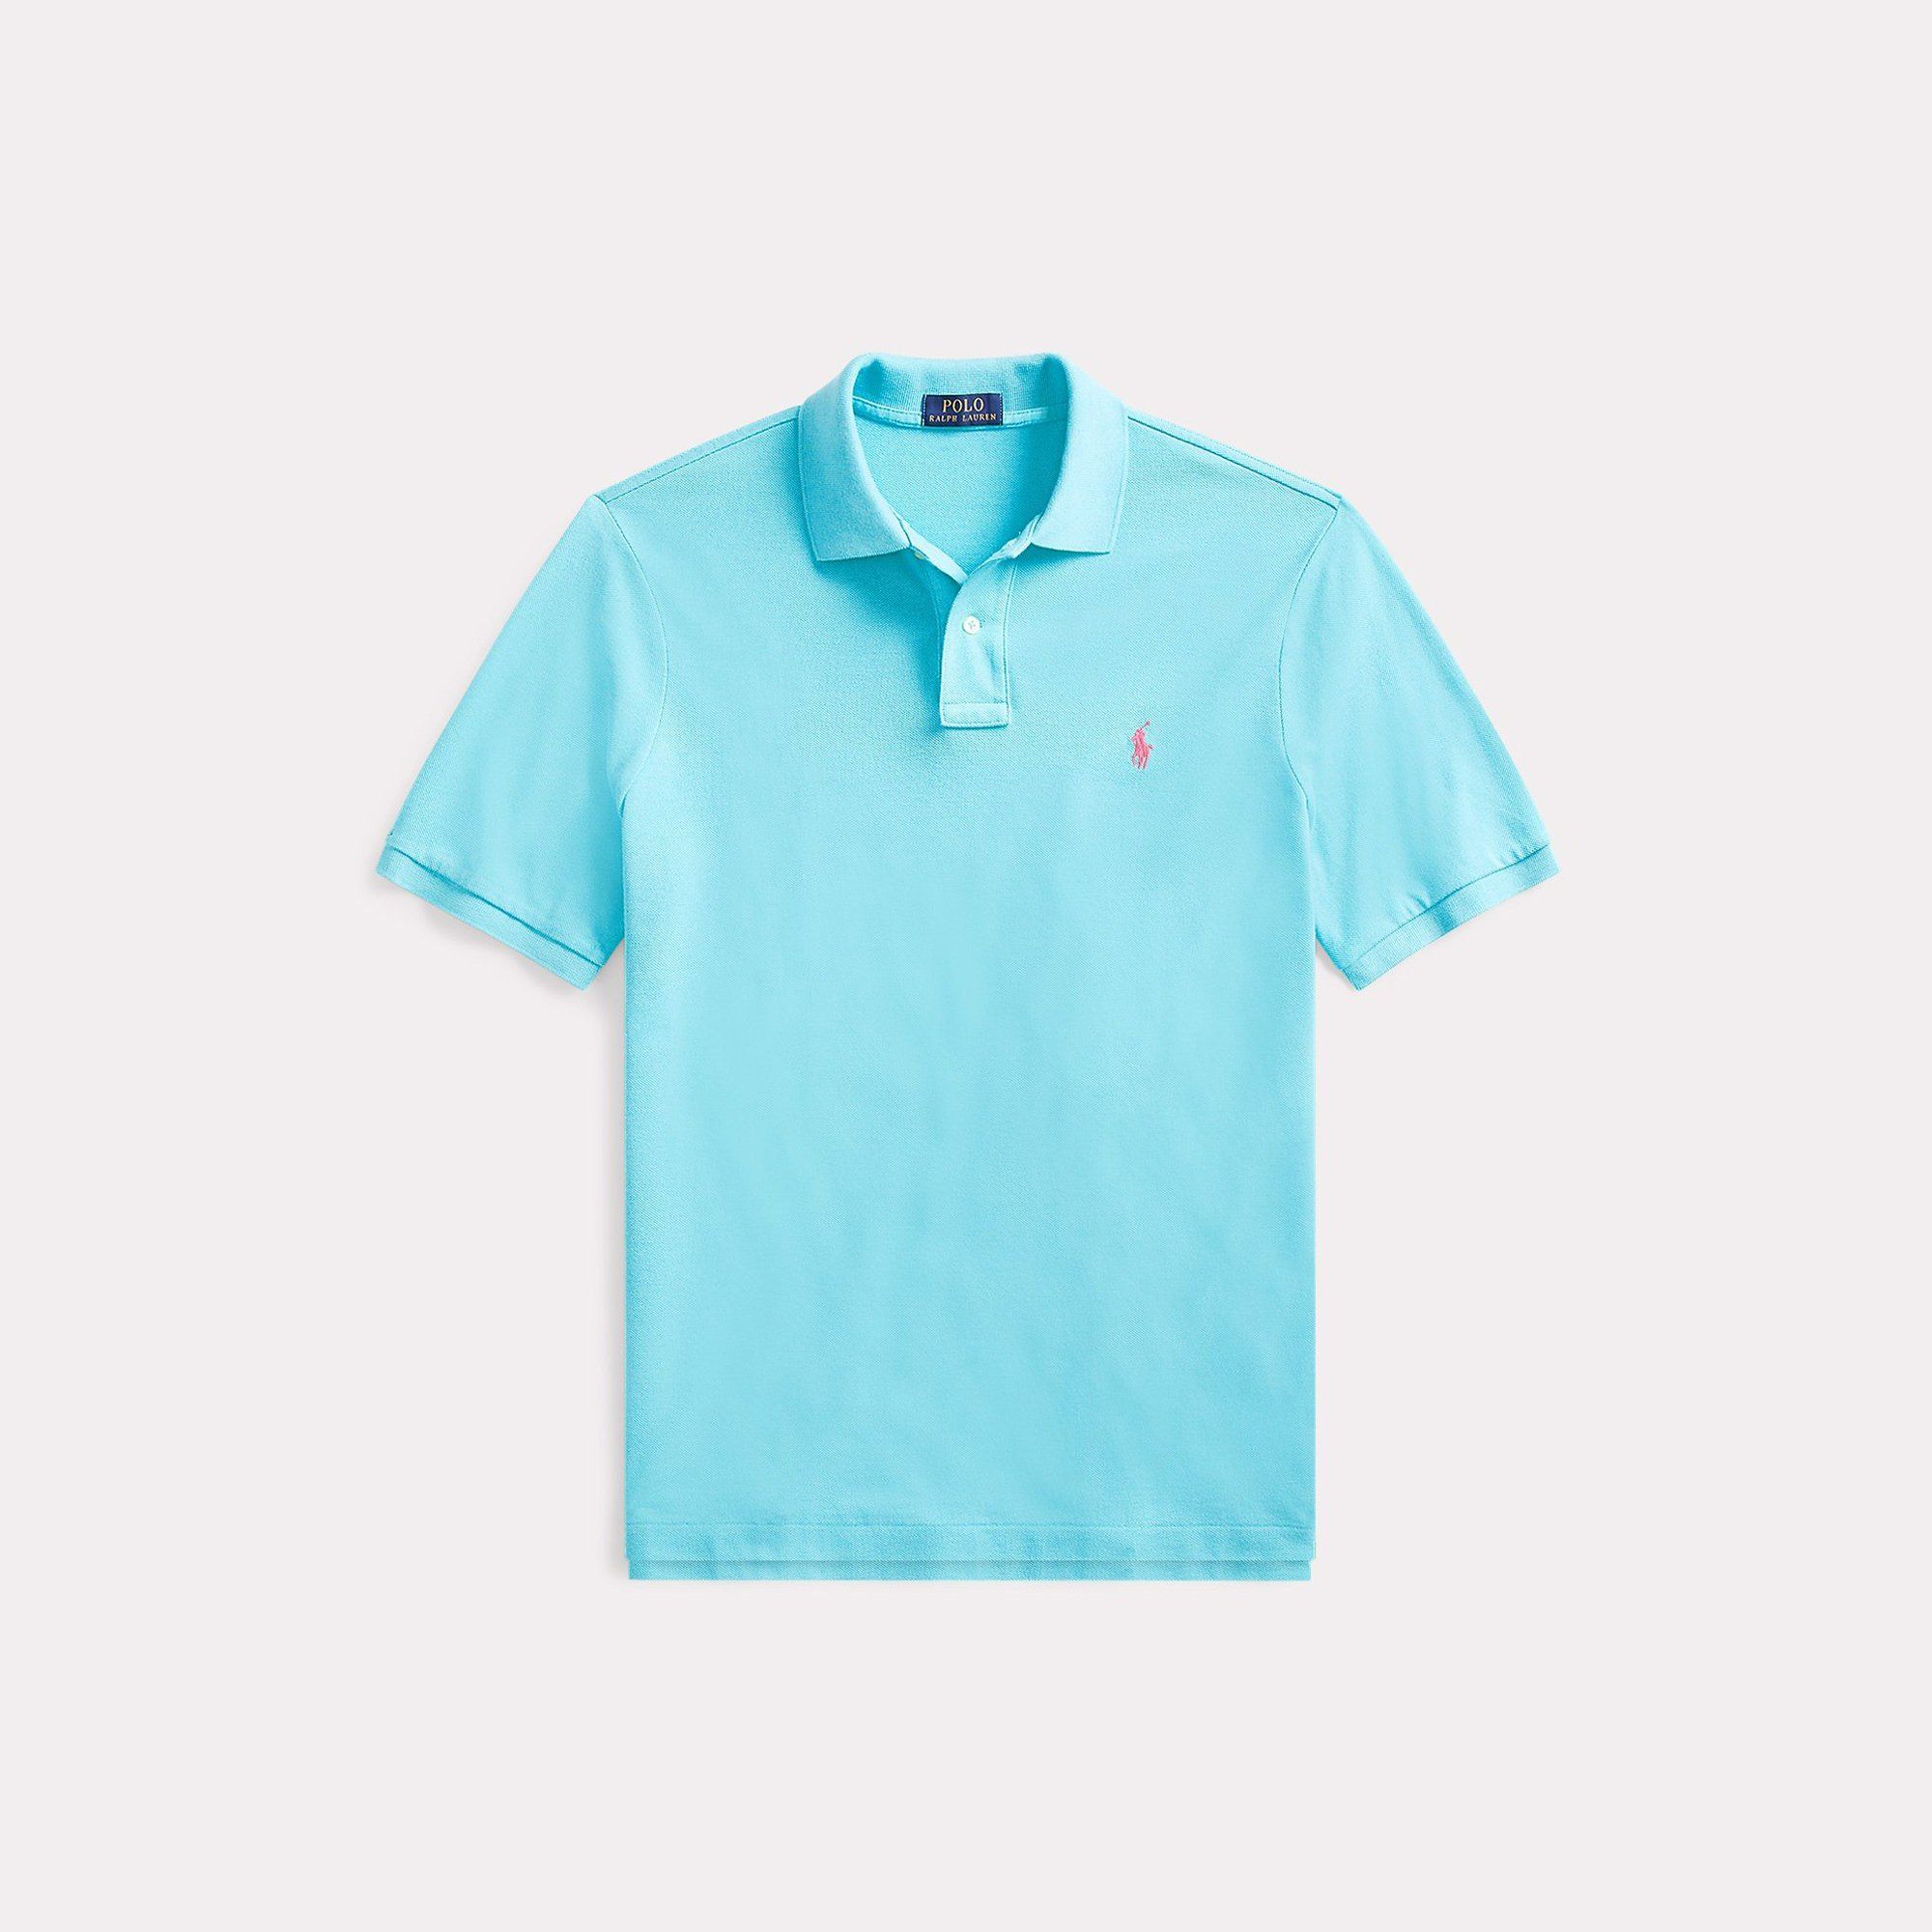  Ralph Lauren The Iconic Mesh Polo Shirt - French Turquoise/Pink (Slim) 